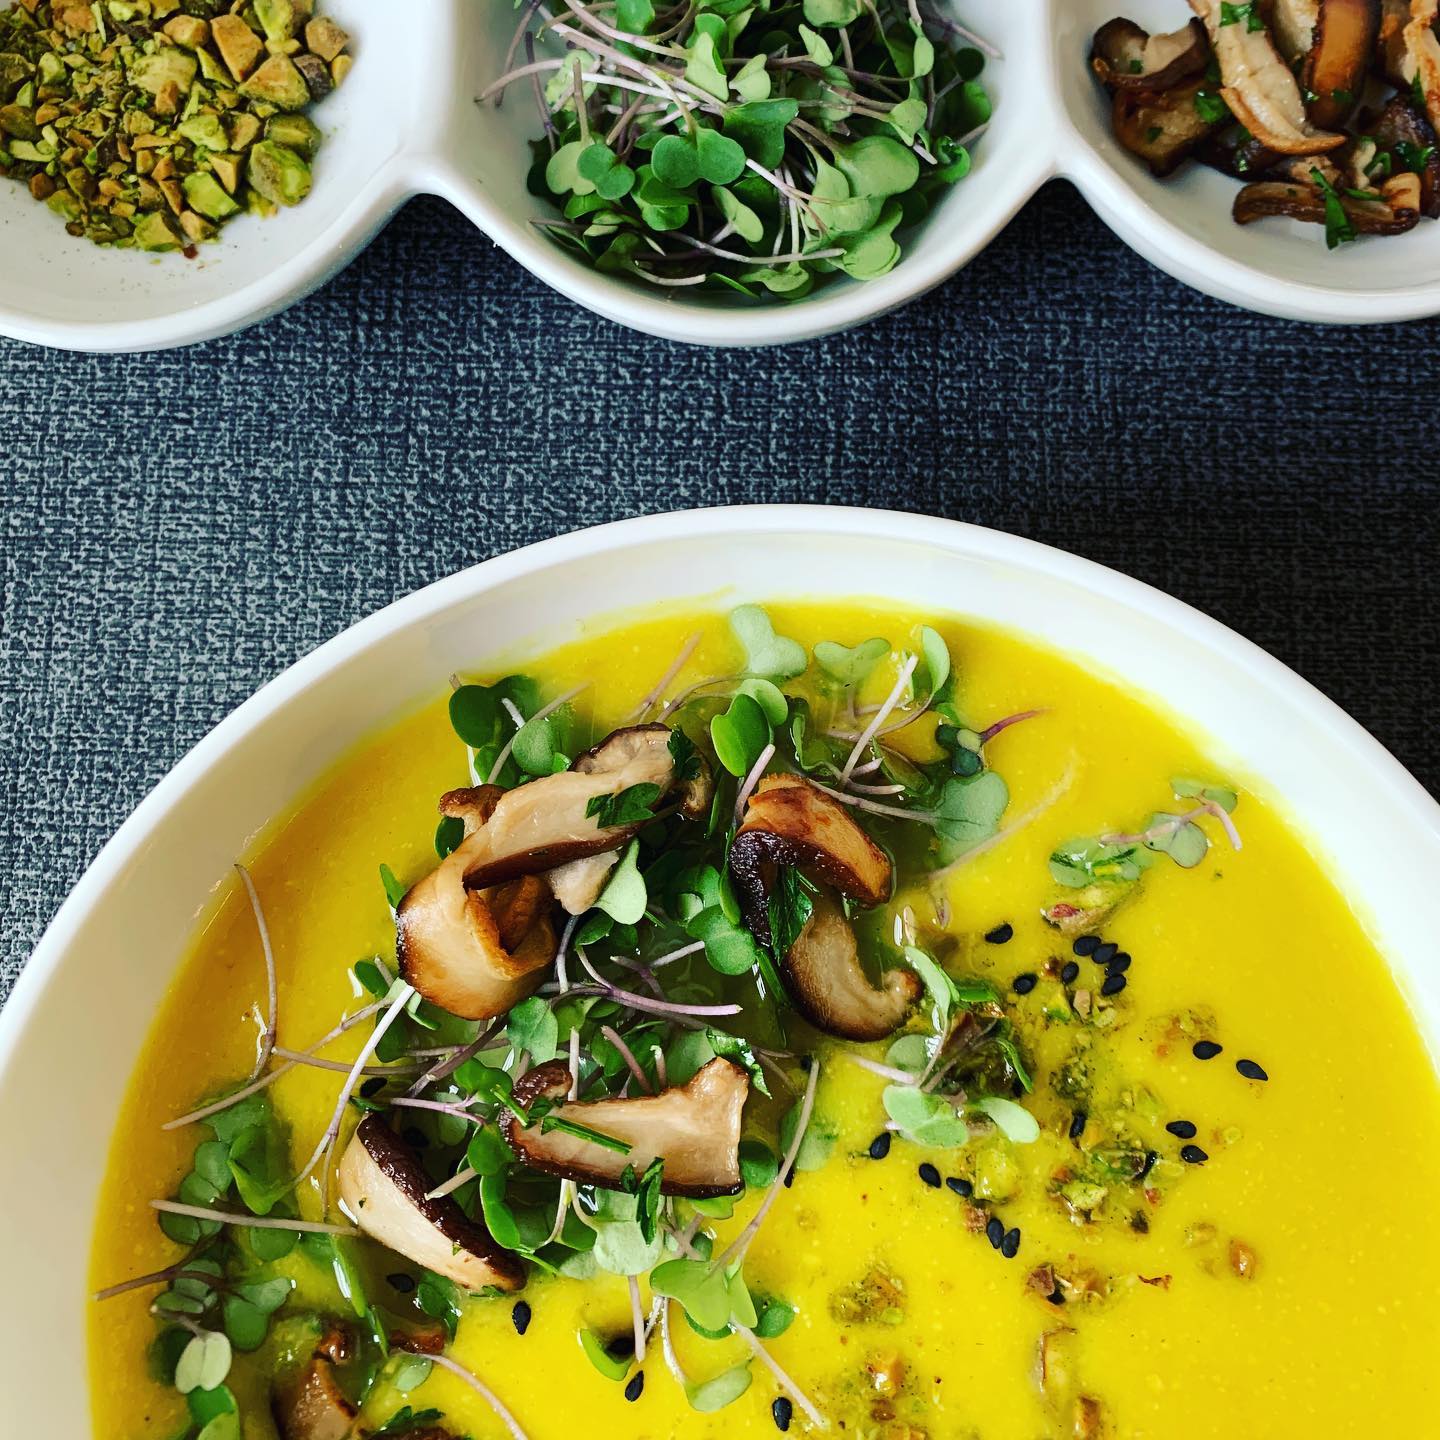 Celebrating turmeric and cauliflower soup with shiitake mushrooms, micro kale and crushed pistachios. Soup by @maxkiesler